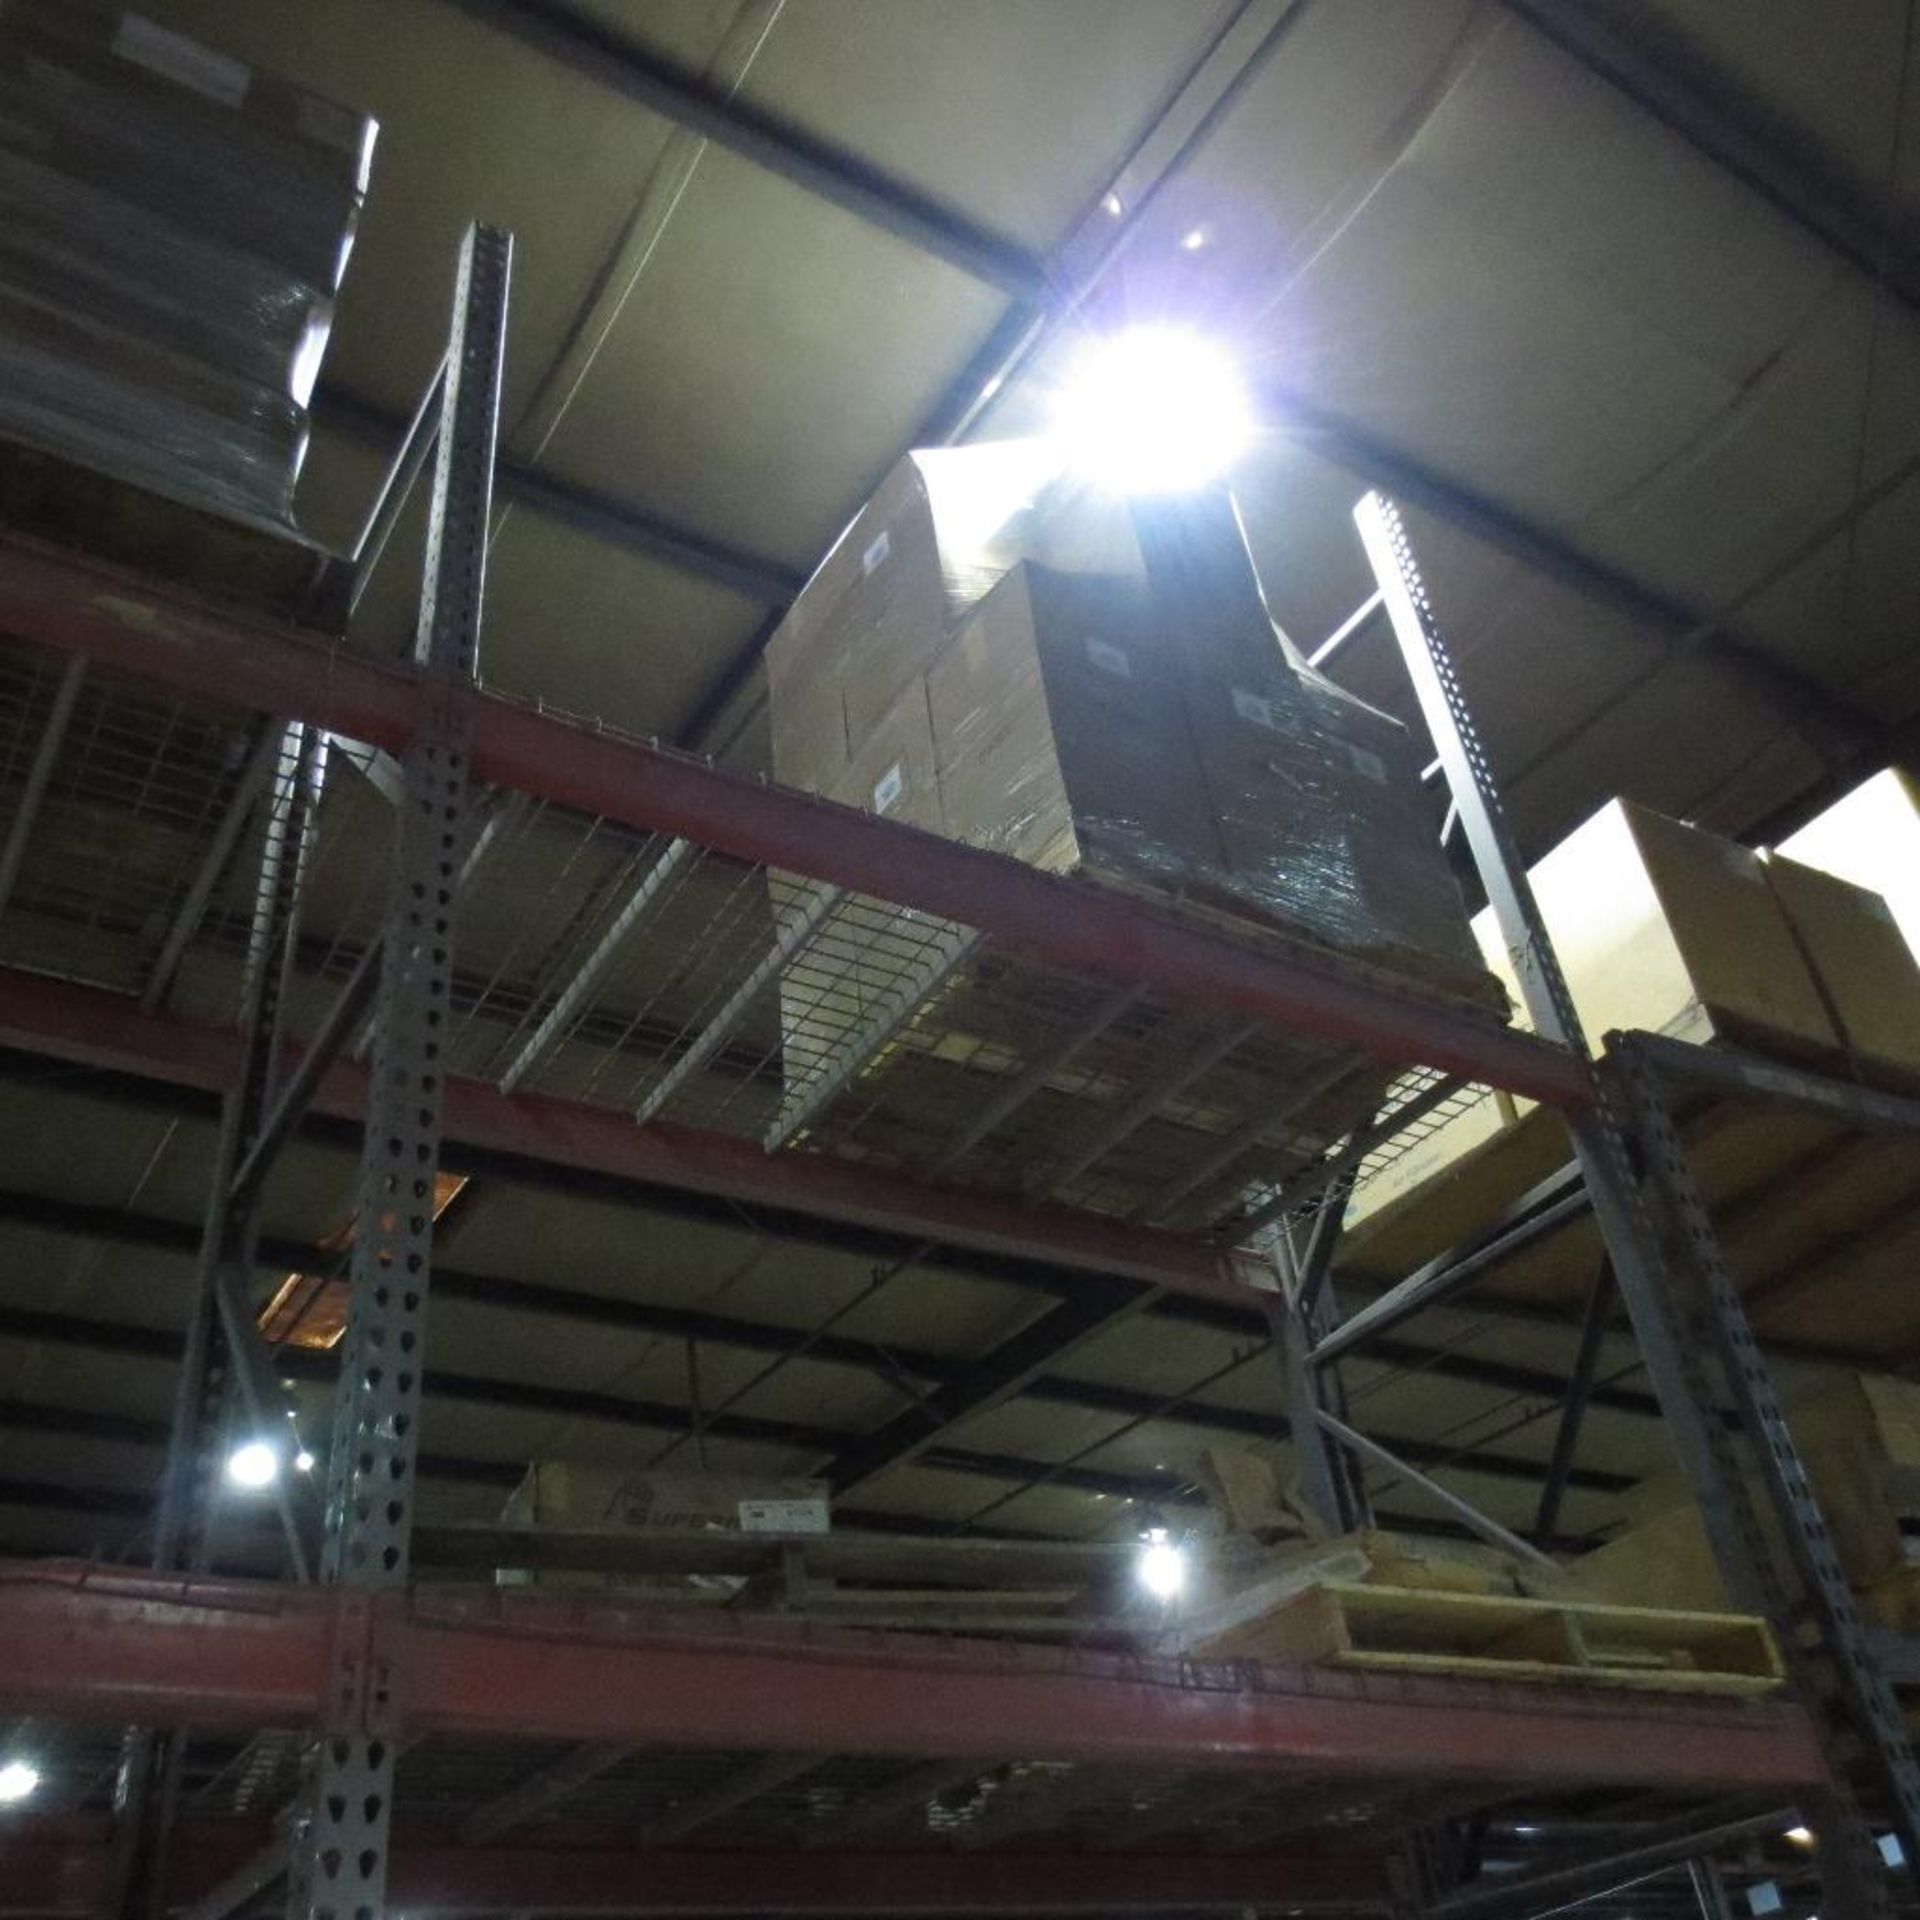 Items on pallet racking - Image 4 of 8